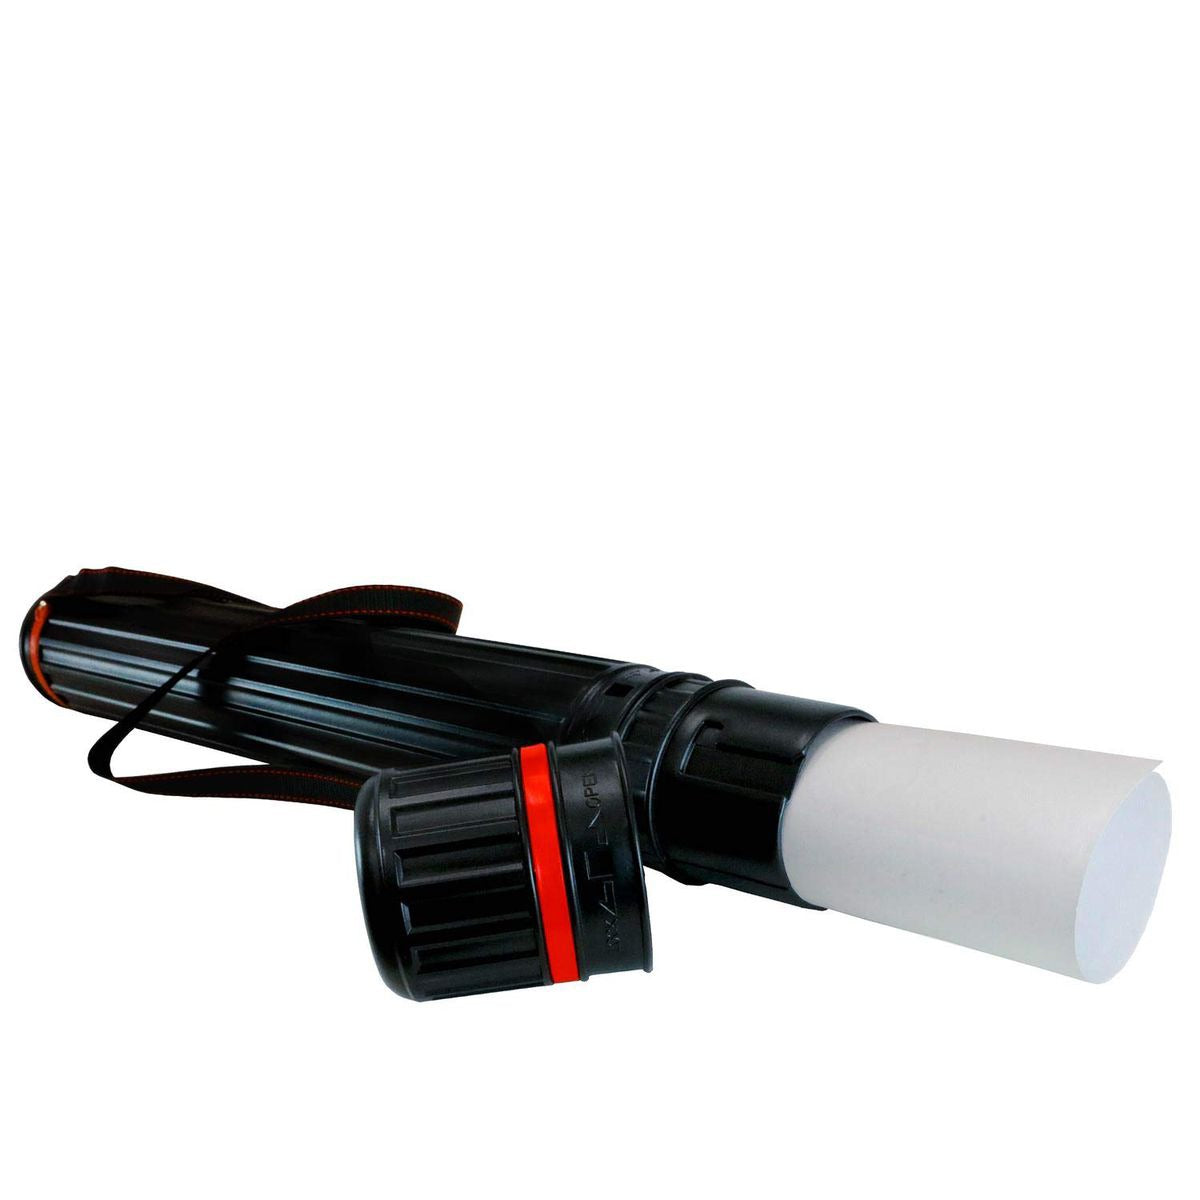 Document tube Diameter: 3.5inch, Length: 23-43 inch, Telescope function,  With Hook & shoulder strap - WHOLESALEARTSFRAMES.COM